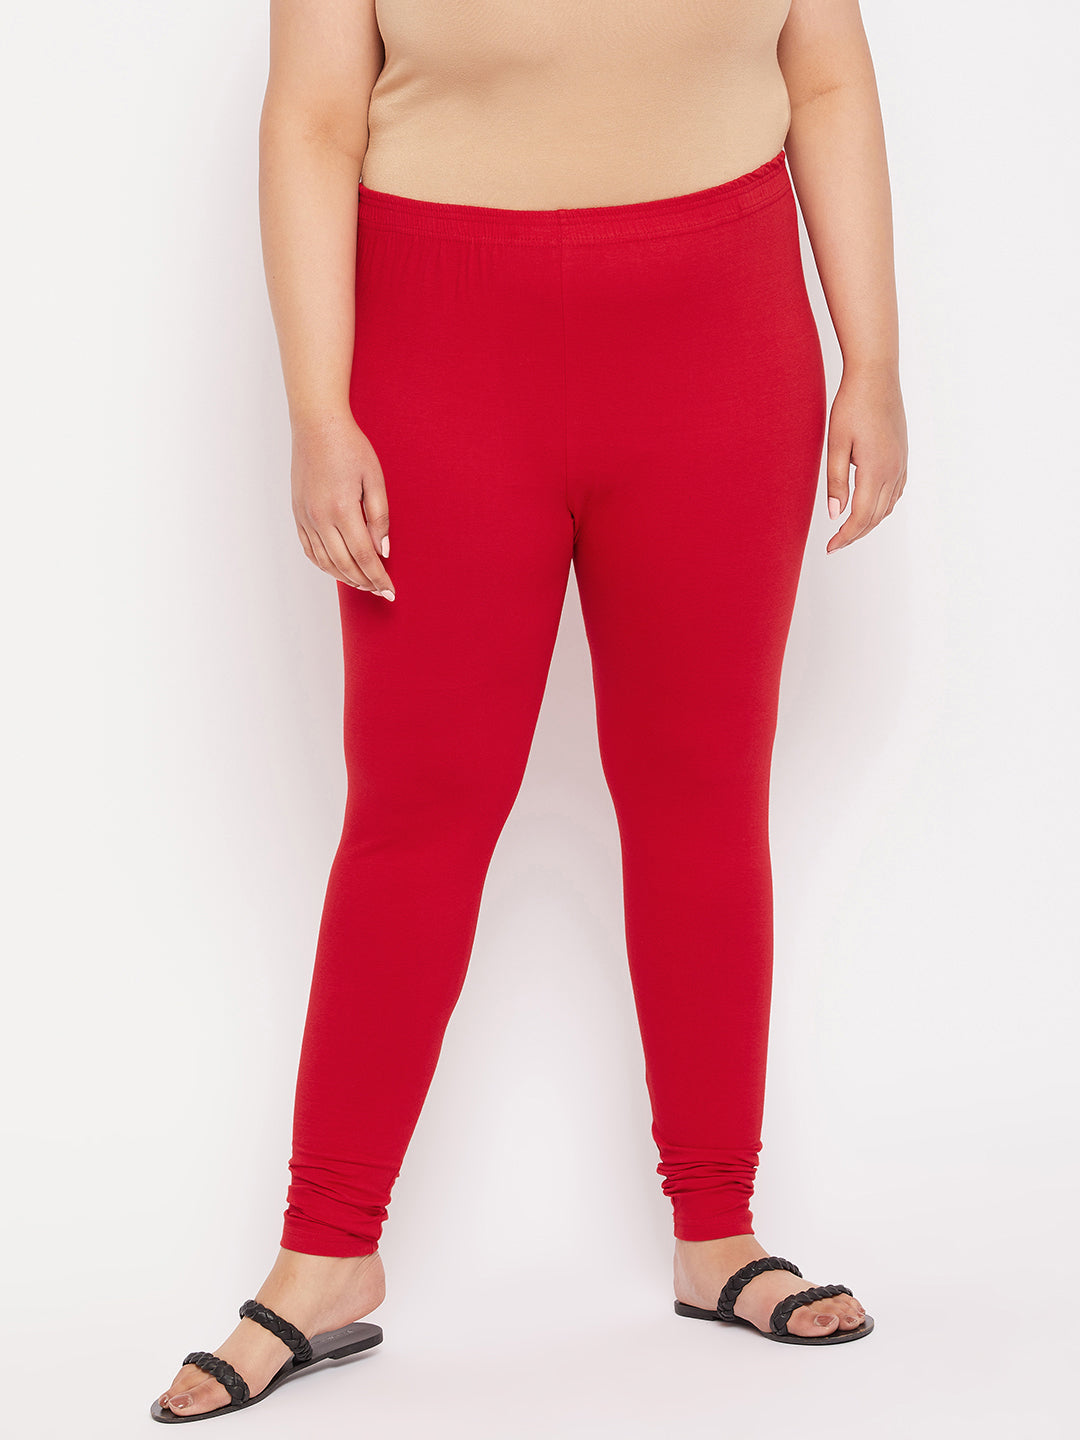 Red Solid Ankle Length Leggings